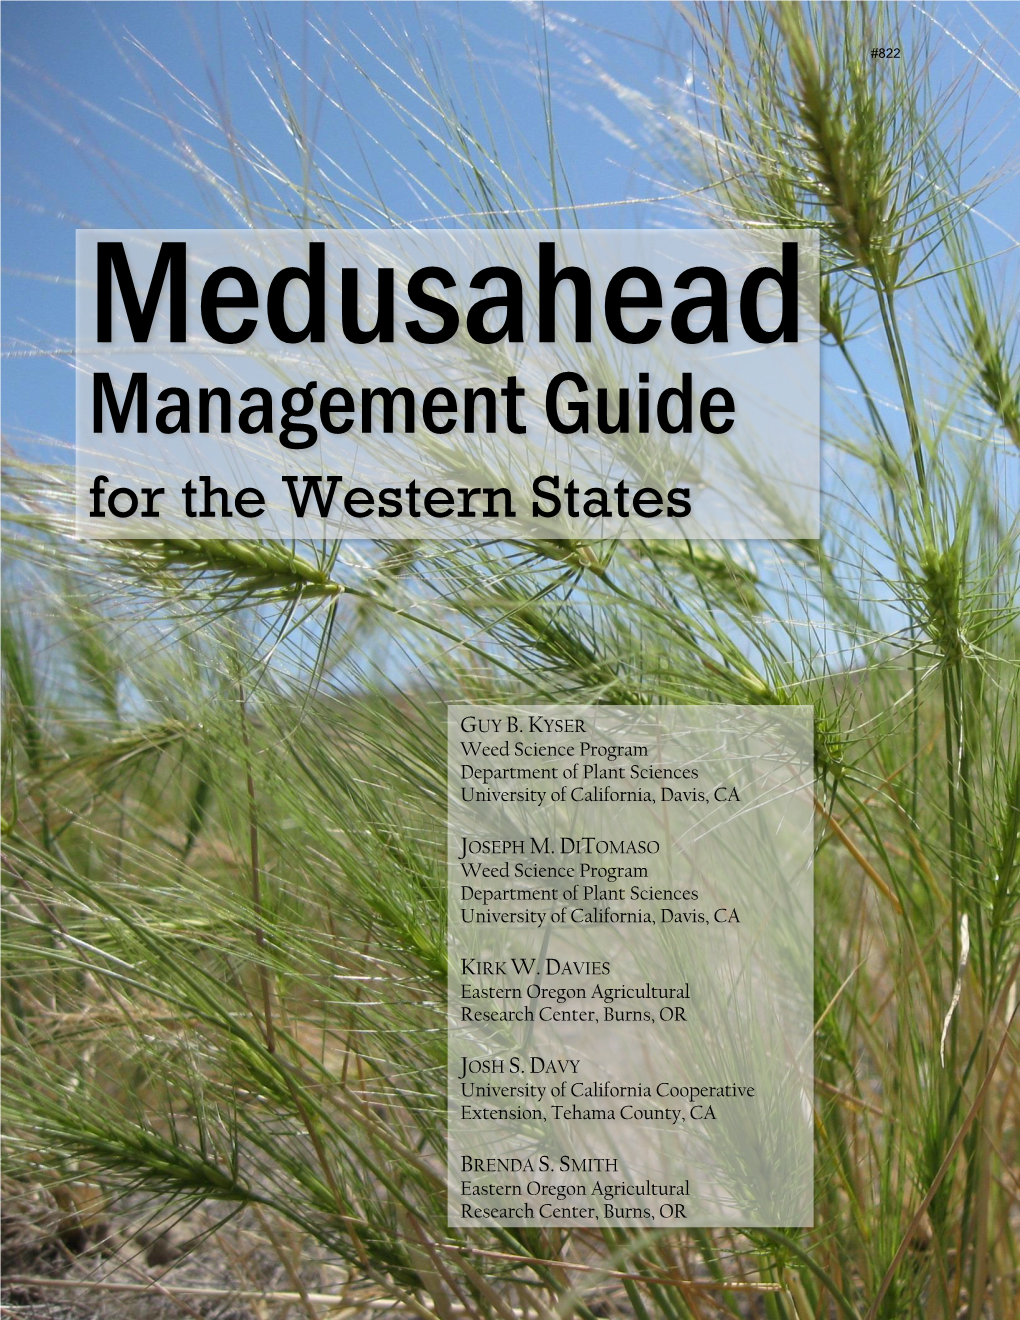 Medusahead Management Guide for the Western States. University of California, Weed Research and Information Center, Davis